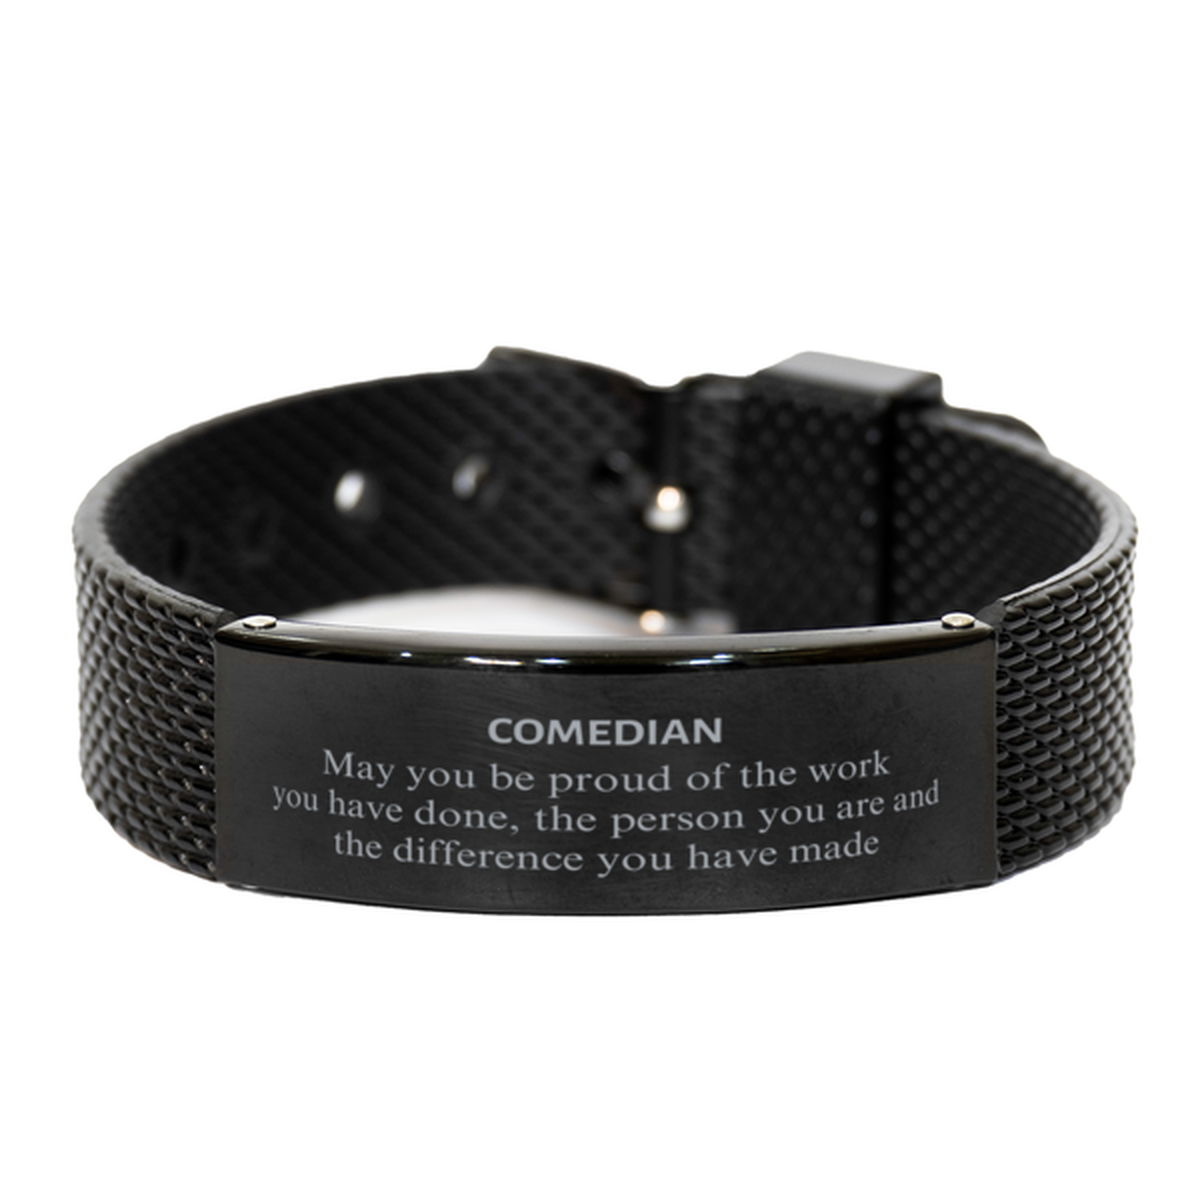 Comedian May you be proud of the work you have done, Retirement Comedian Black Shark Mesh Bracelet for Colleague Appreciation Gifts Amazing for Comedian